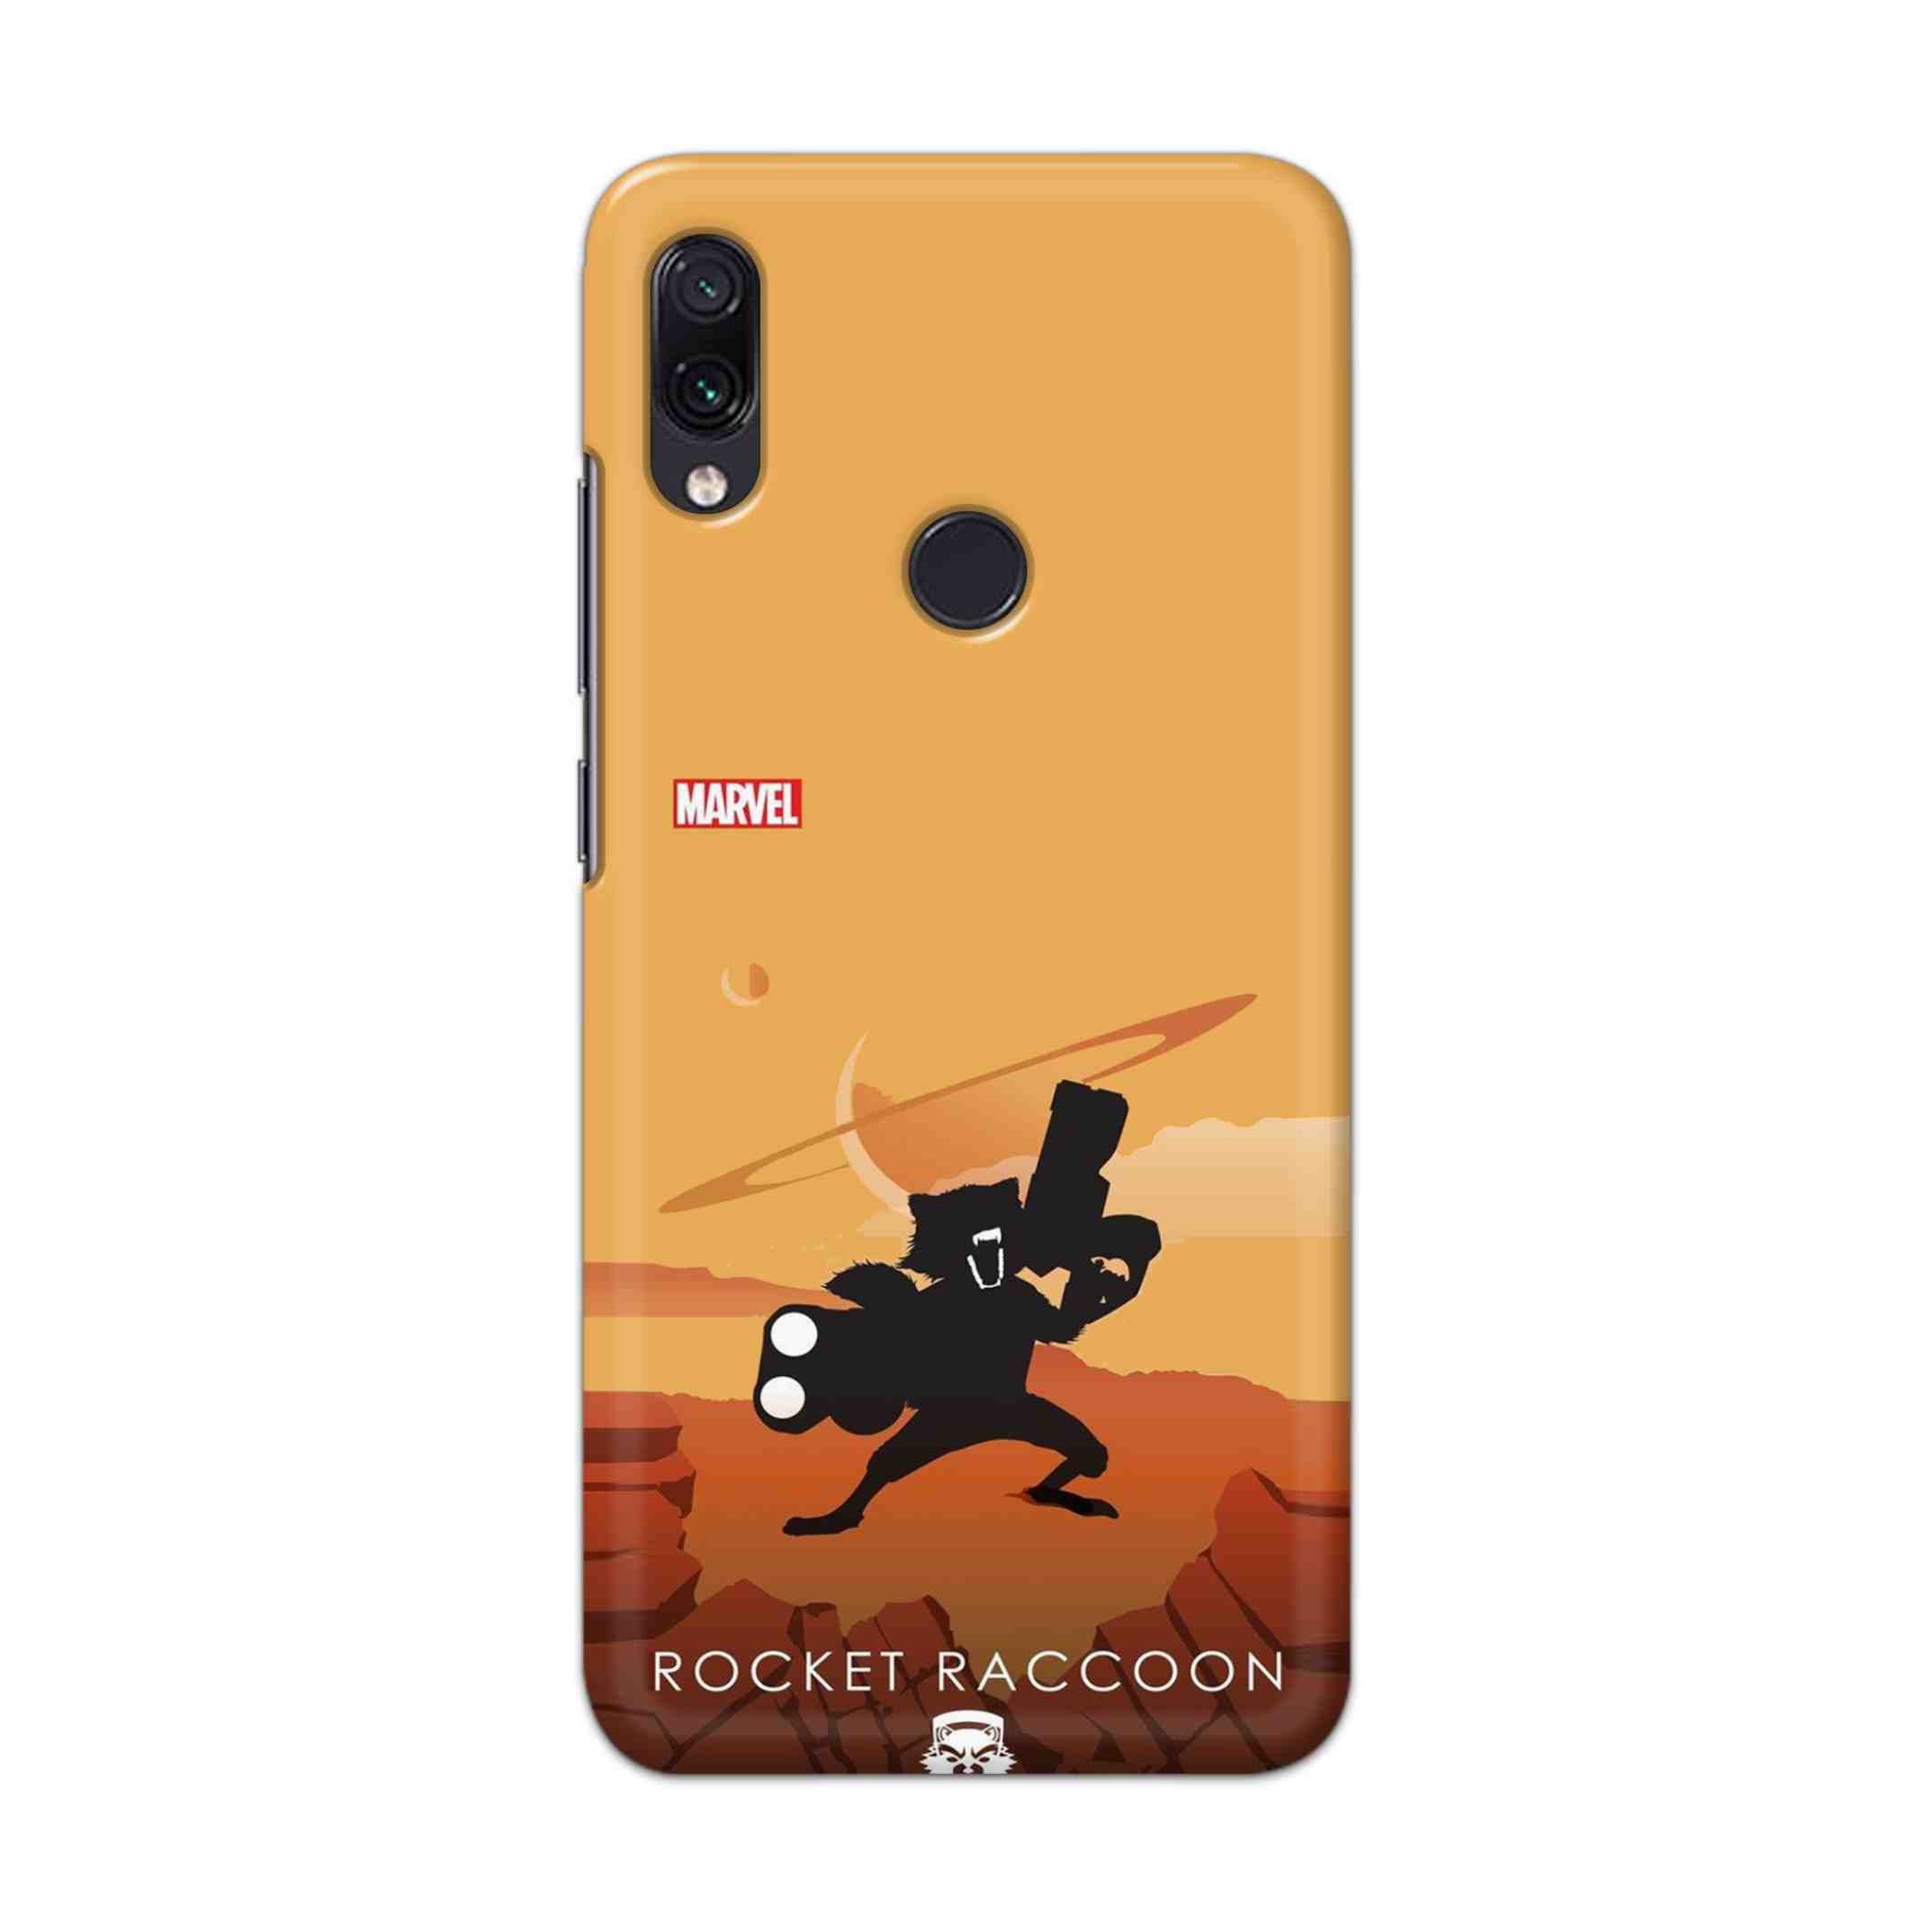 Buy Rocket Raccoon Hard Back Mobile Phone Case Cover For Redmi Note 7 / Note 7 Pro Online